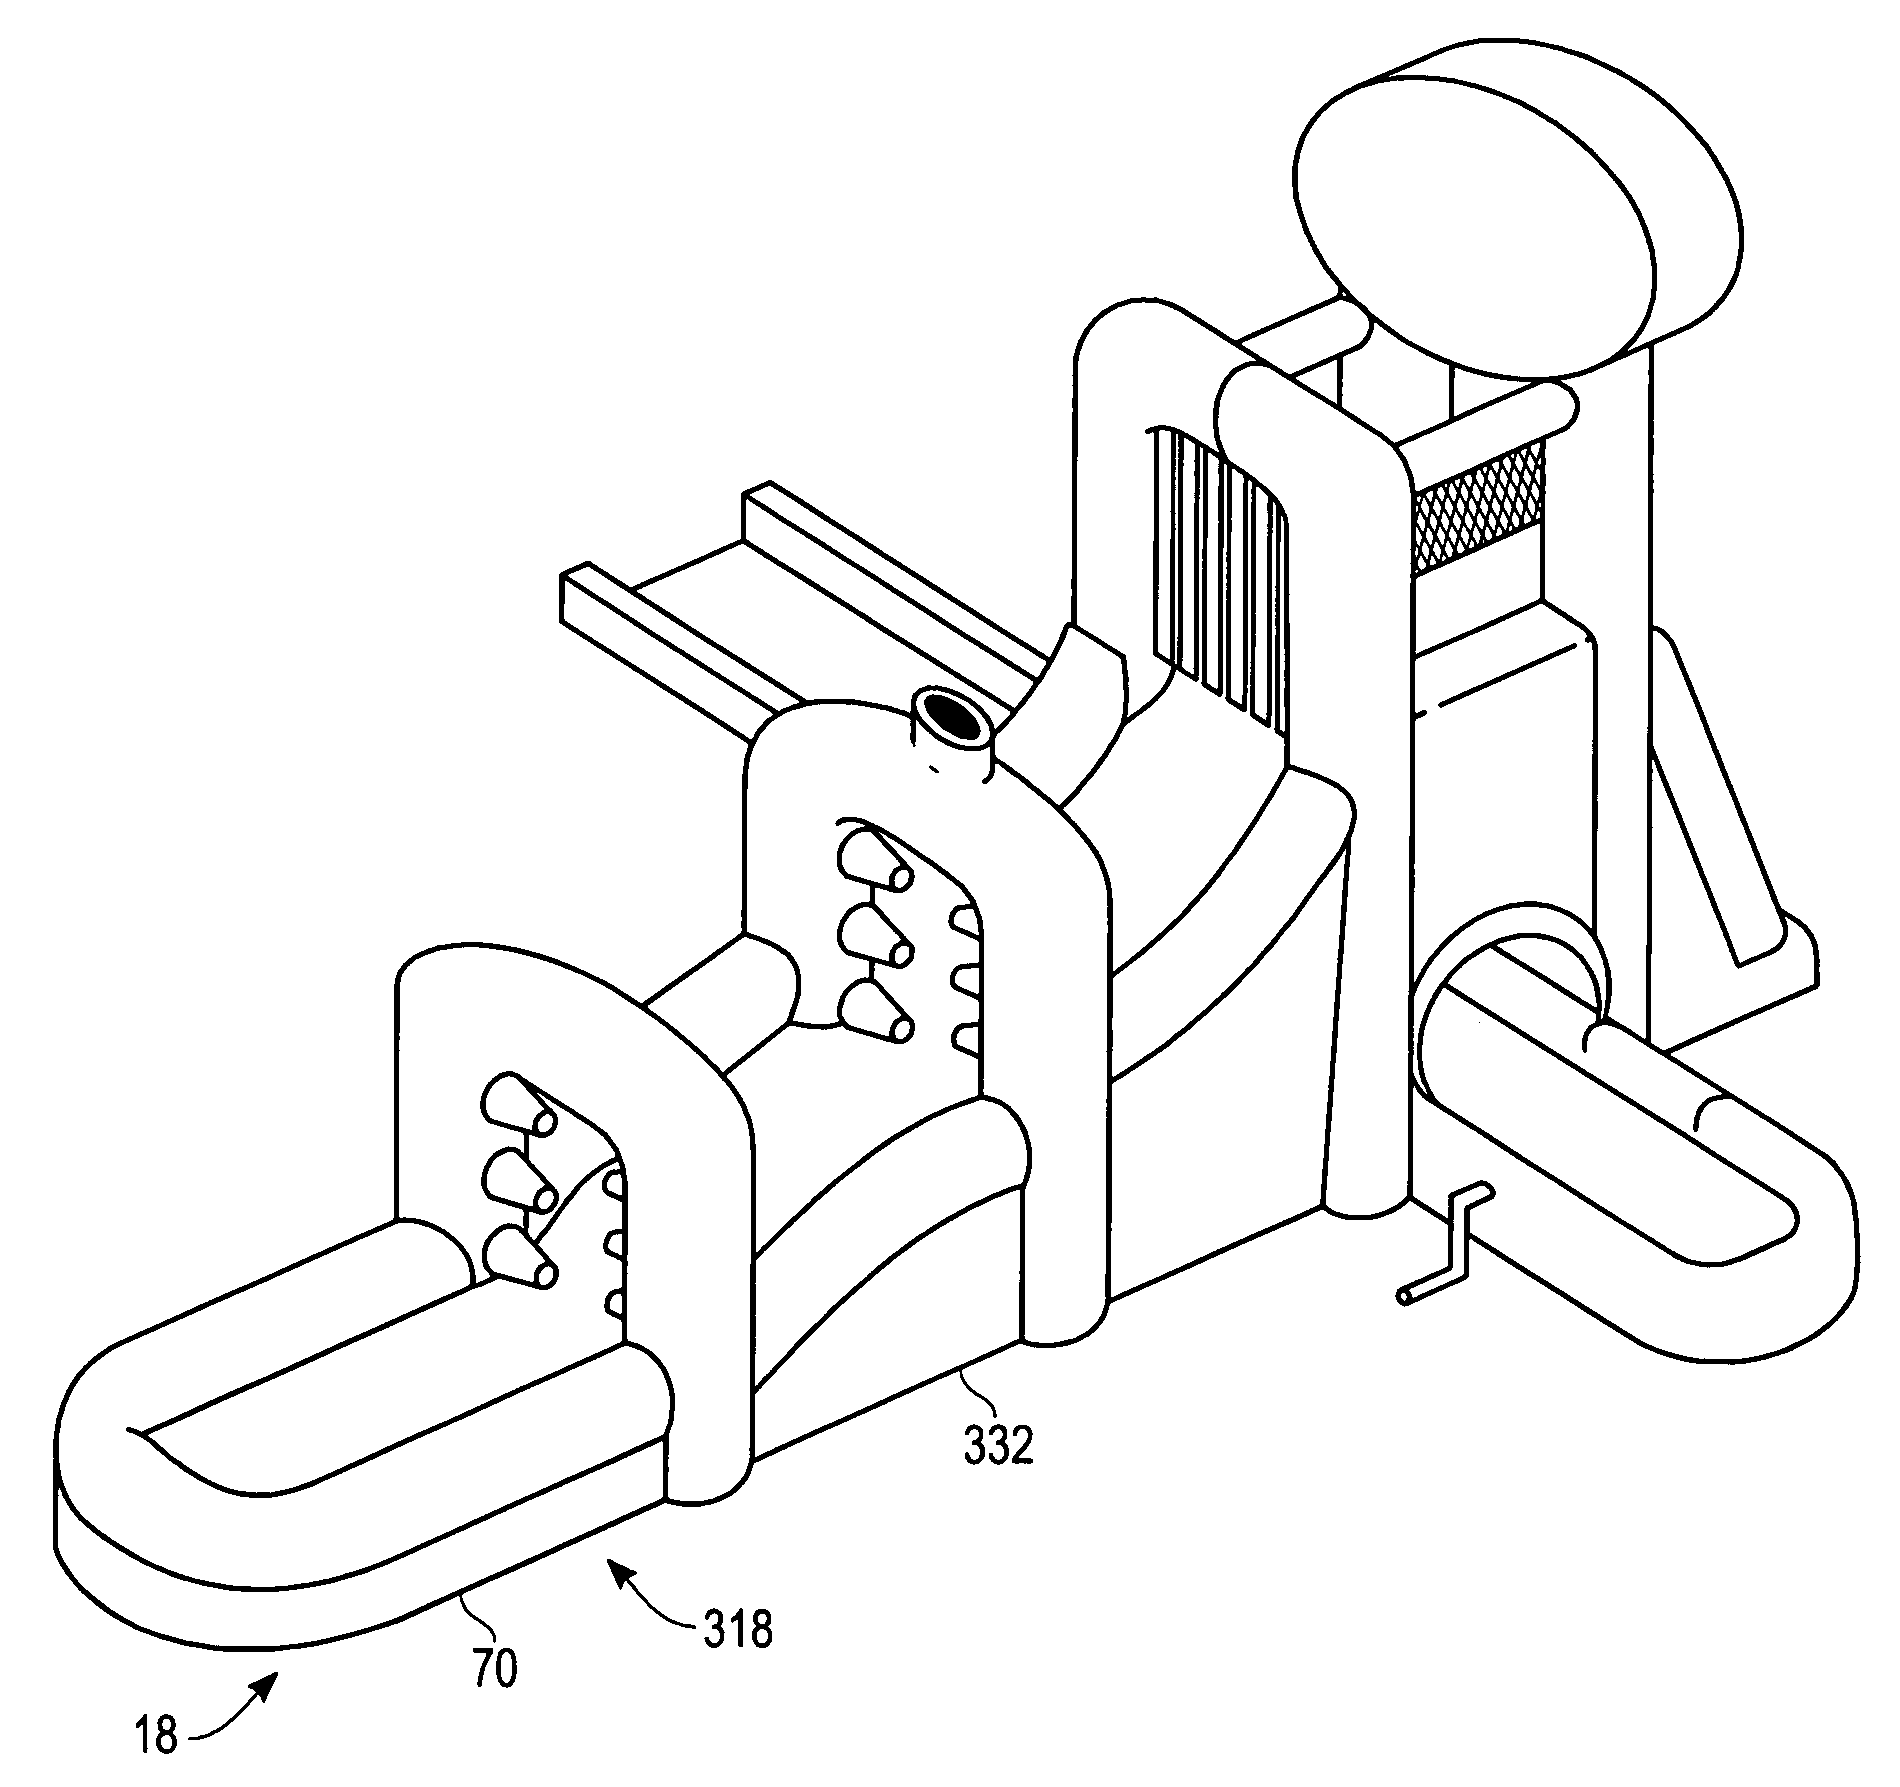 Inflatable car-wash-configured water toy and method